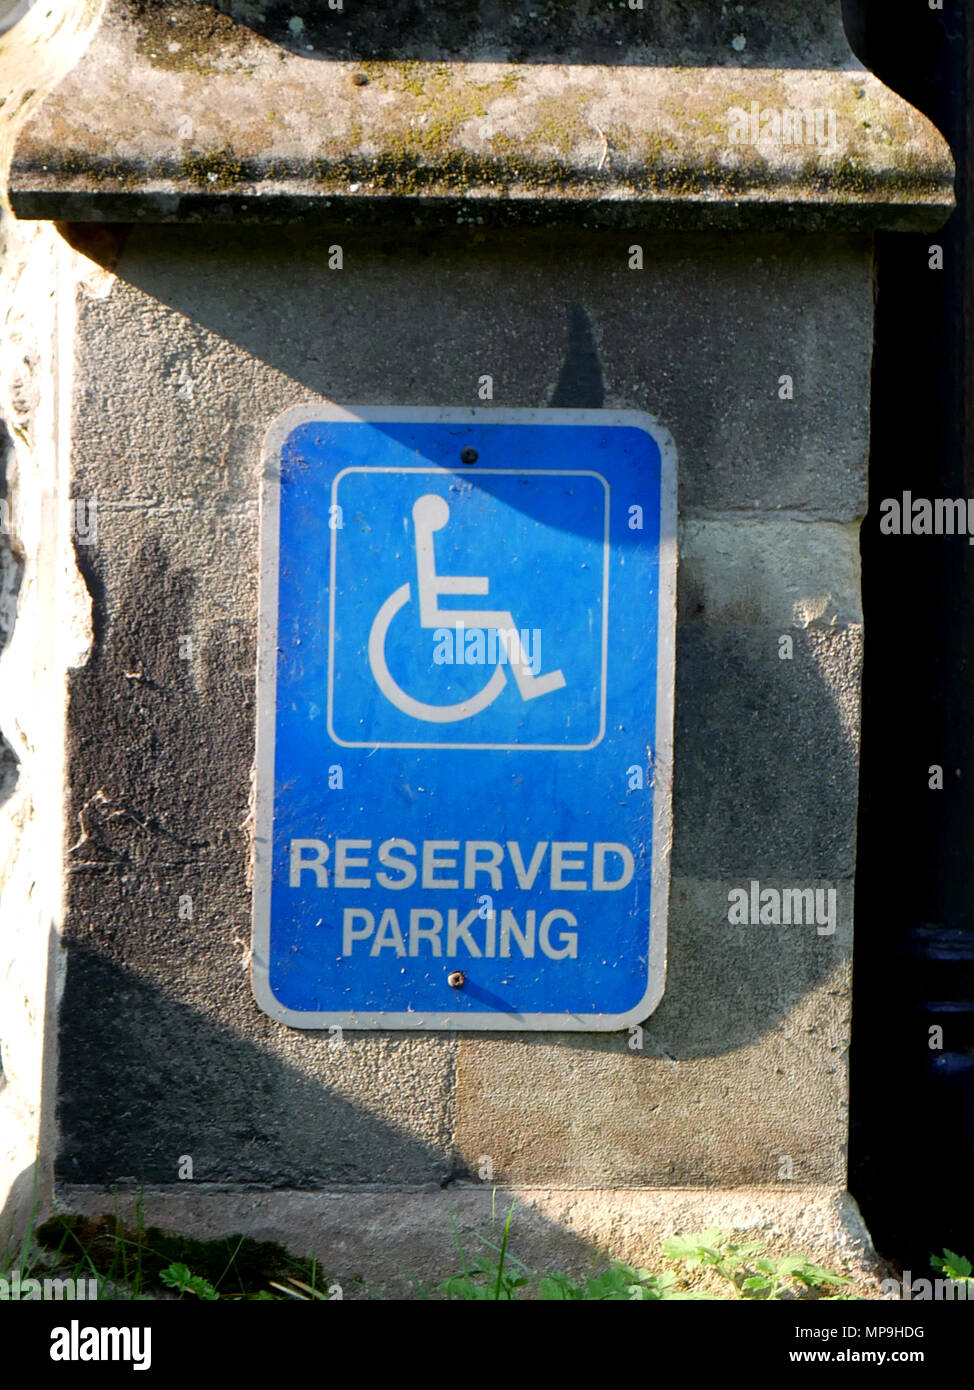 Reserved parking for disabled drivers sign Stock Photo